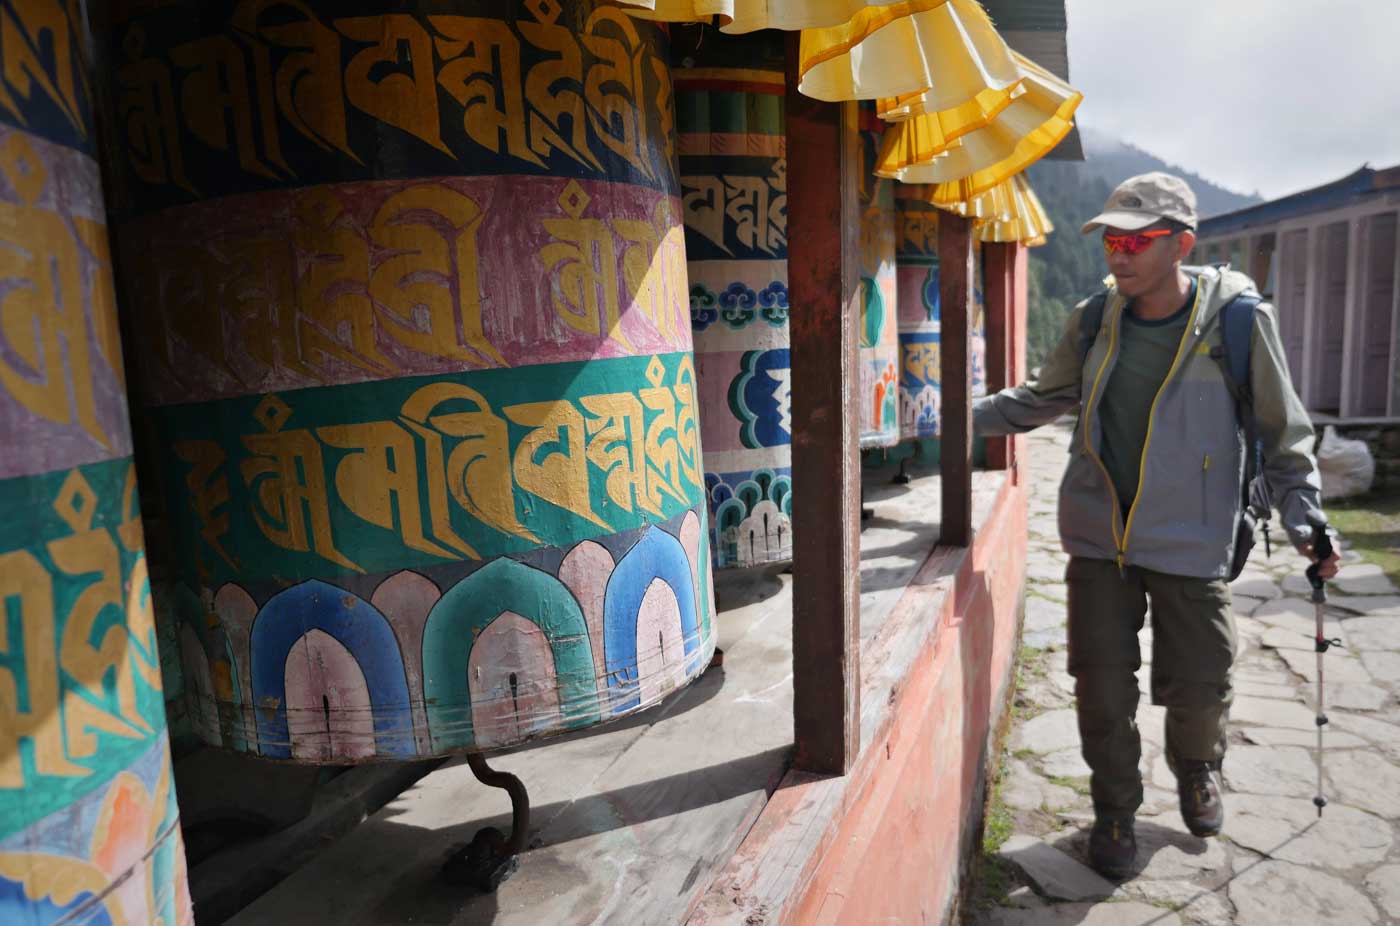 Romi spins the prayer wheels for protection and fortitude for his climb 